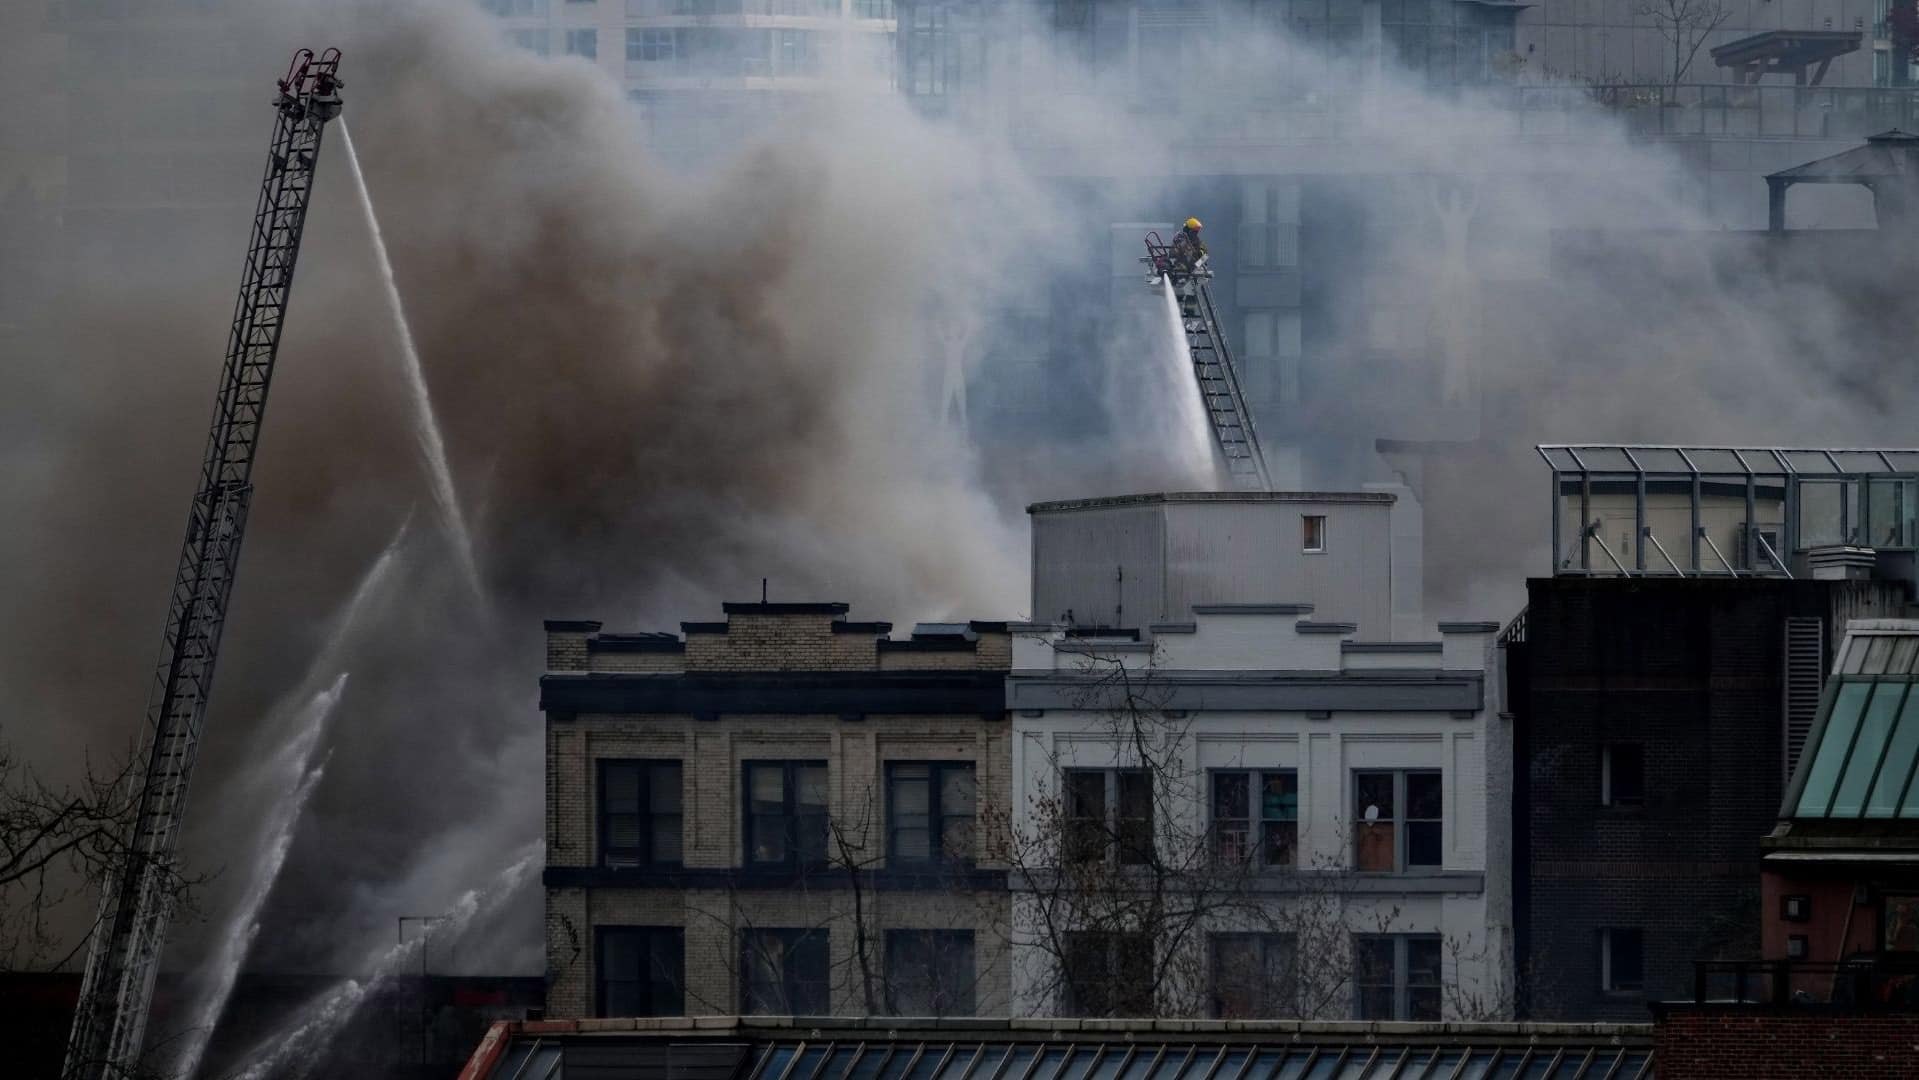 All but 1 resident accounted for after fire destroys building in Vancouver's Gastown area